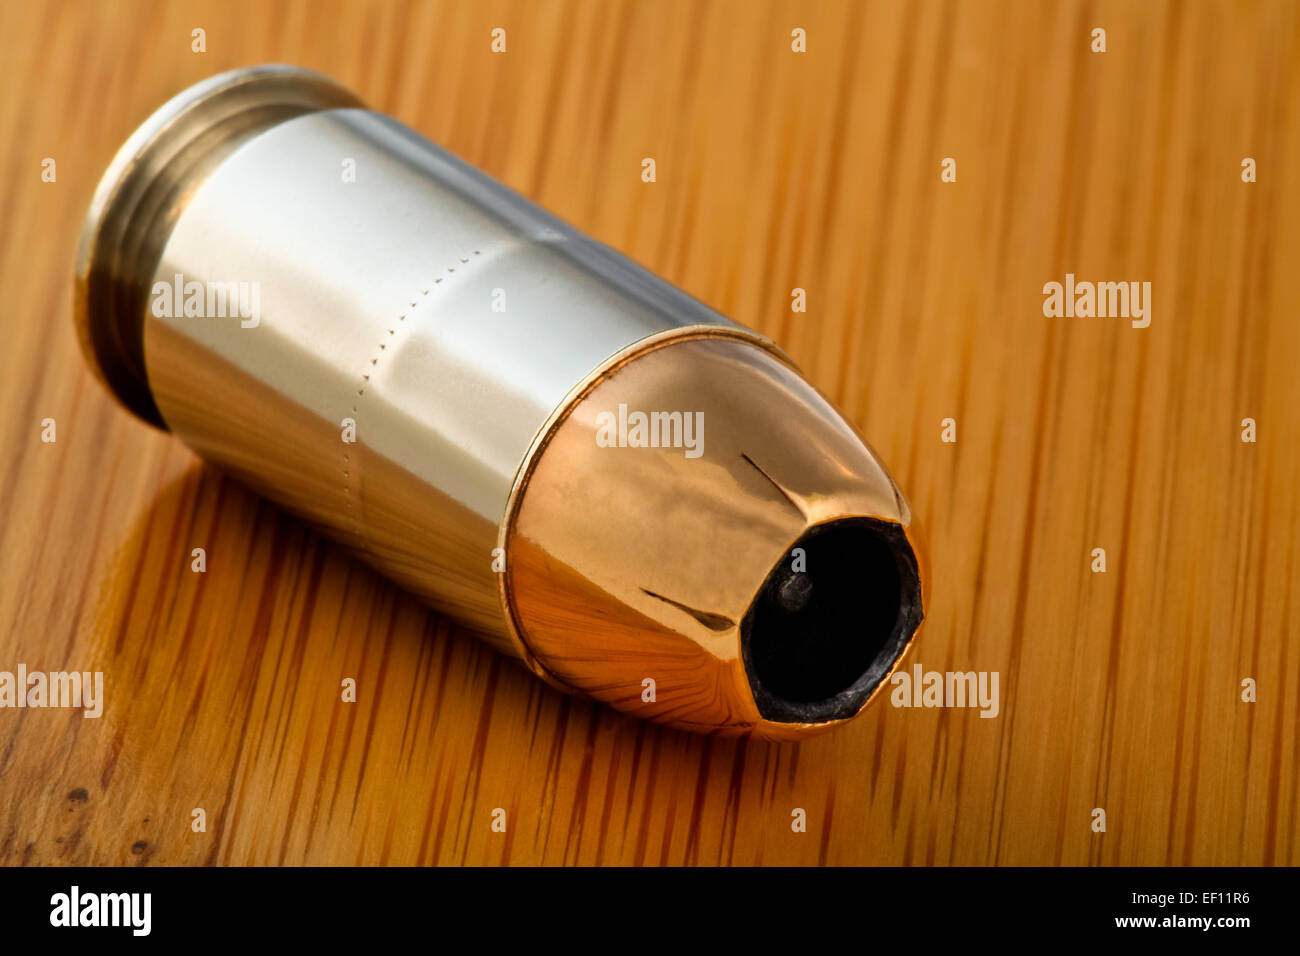 Closeup 45 caliber jacketed hollow point bullet cartridge live round for semi-automatic handgun gun with bamboo wood background Stock Photo